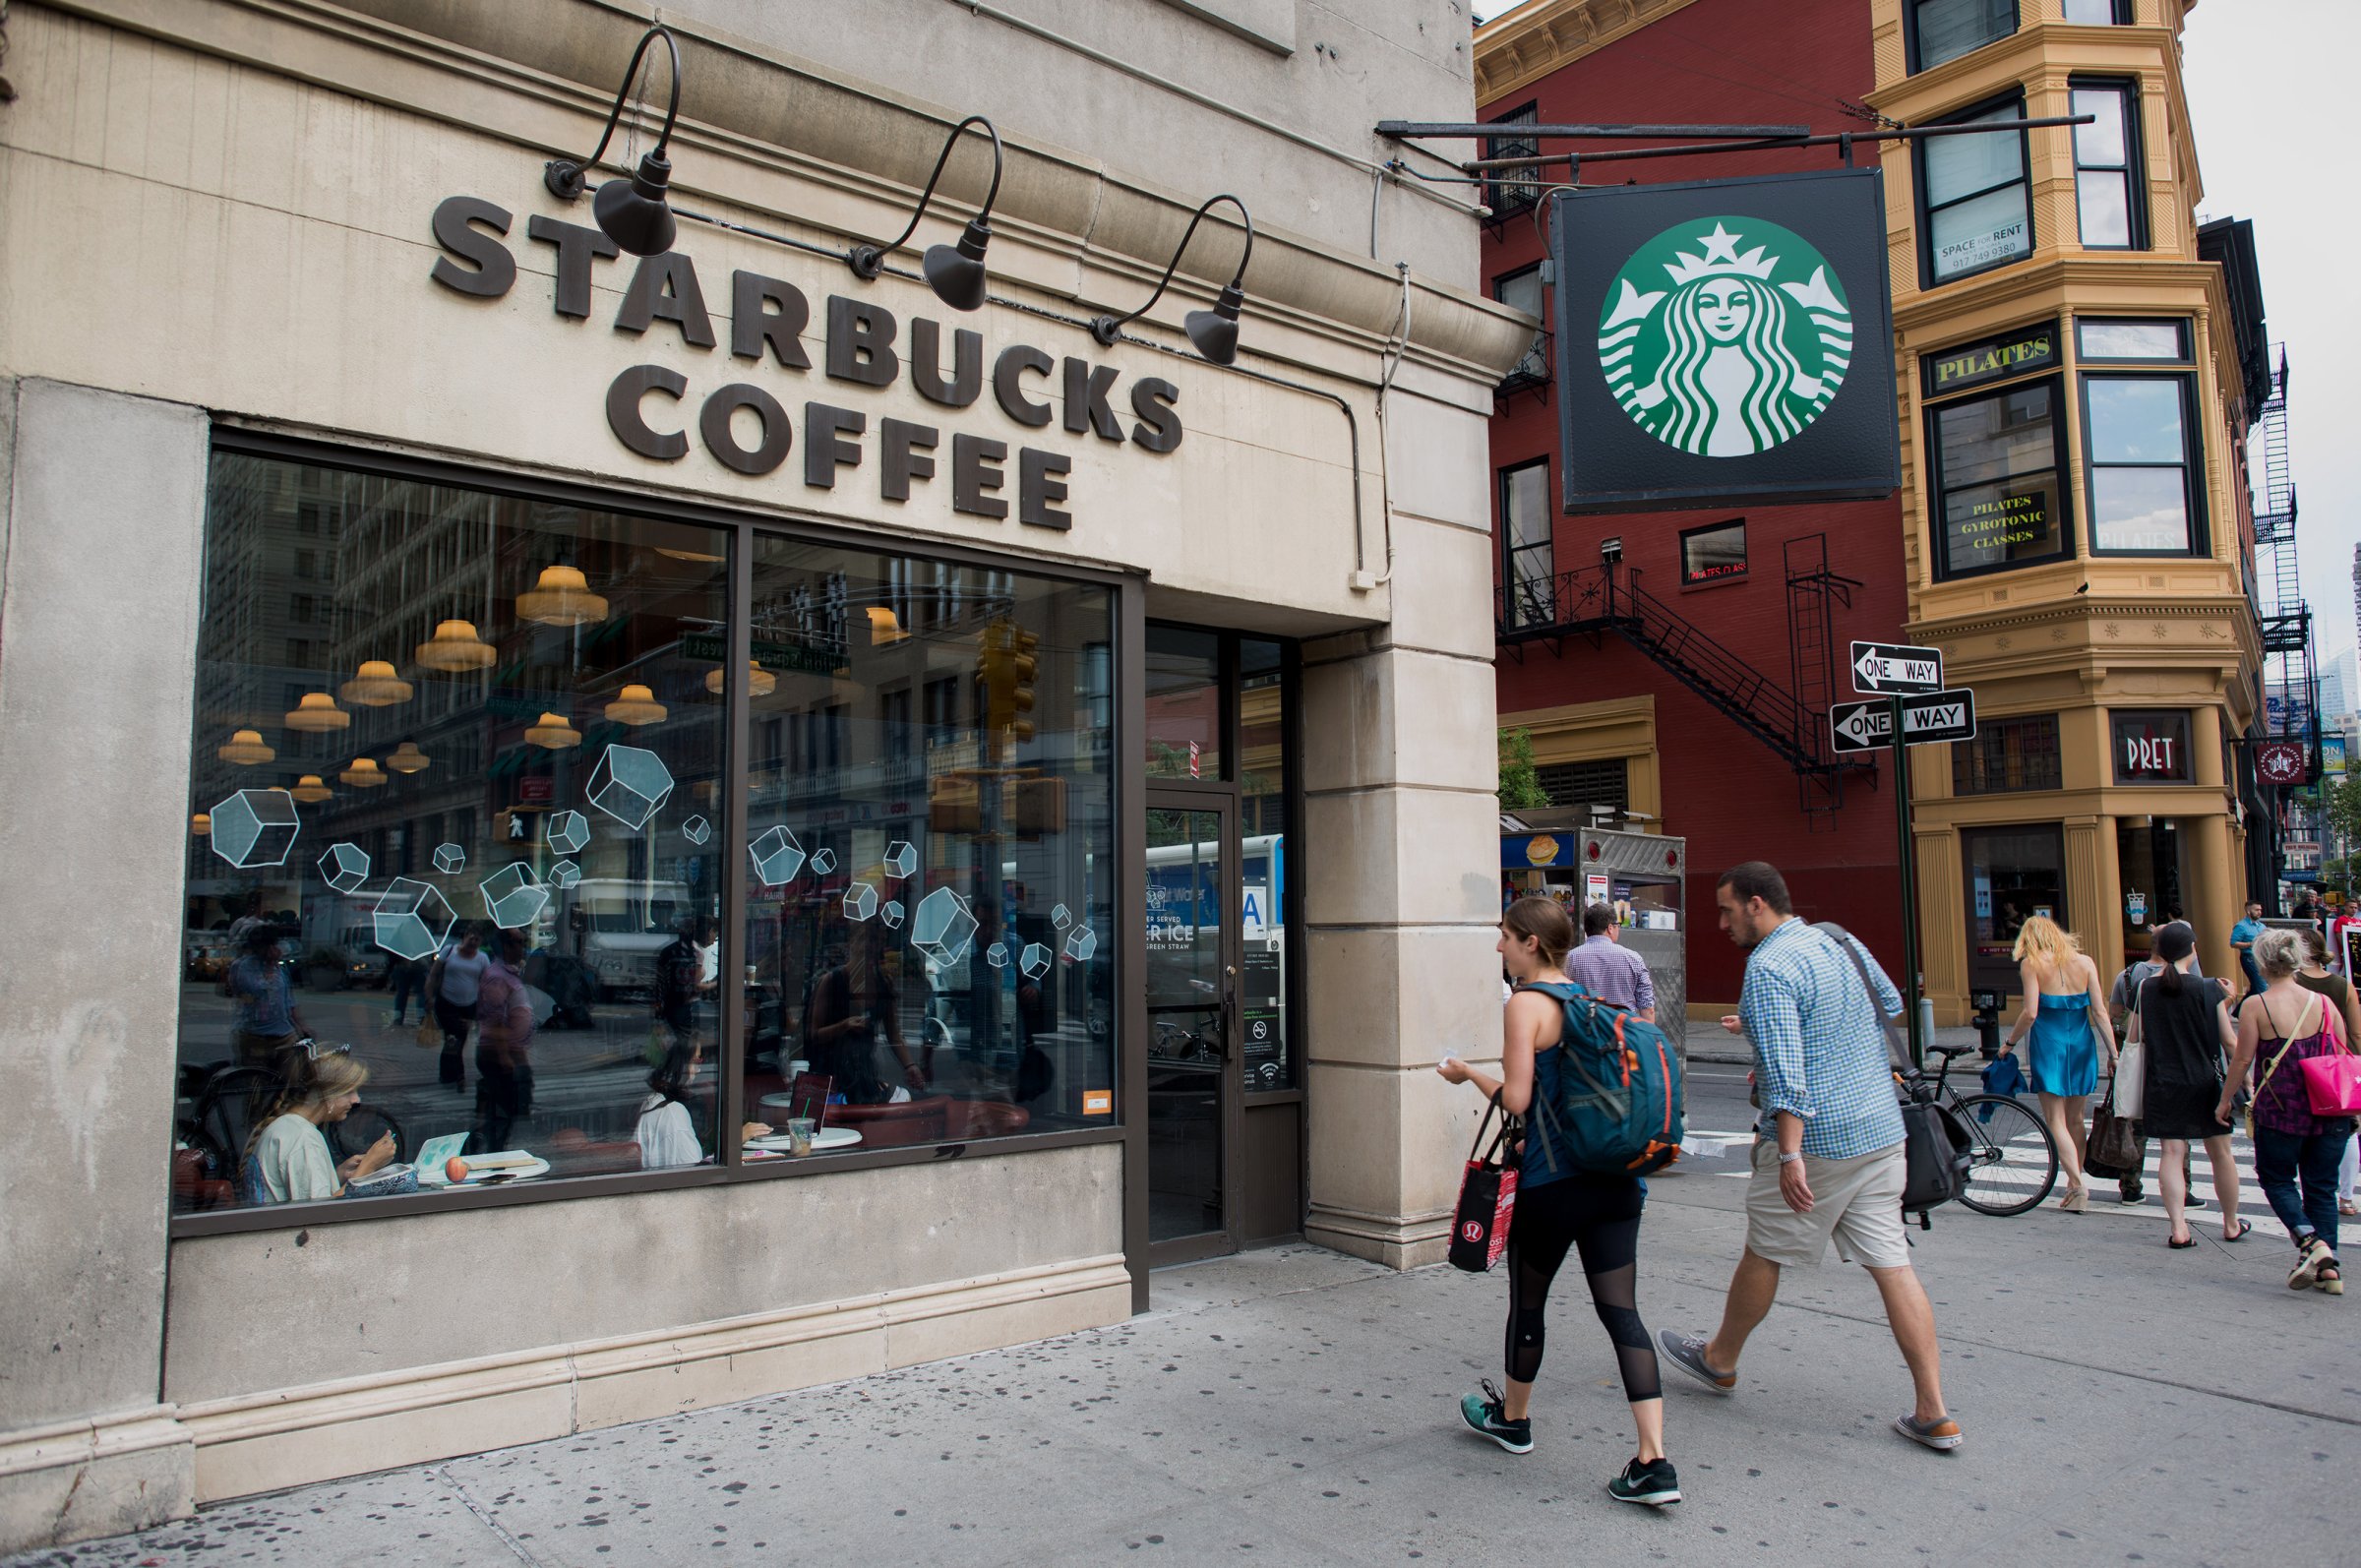 Pedestrians stroll by a Starbucks Coffee shop on the corner of Broadway and East 17th Street in Union Square in New York, New York, U.S., on Tuesday, July 21, 2015. Photographer: Craig Warga/Bloomberg *** Local Caption ***